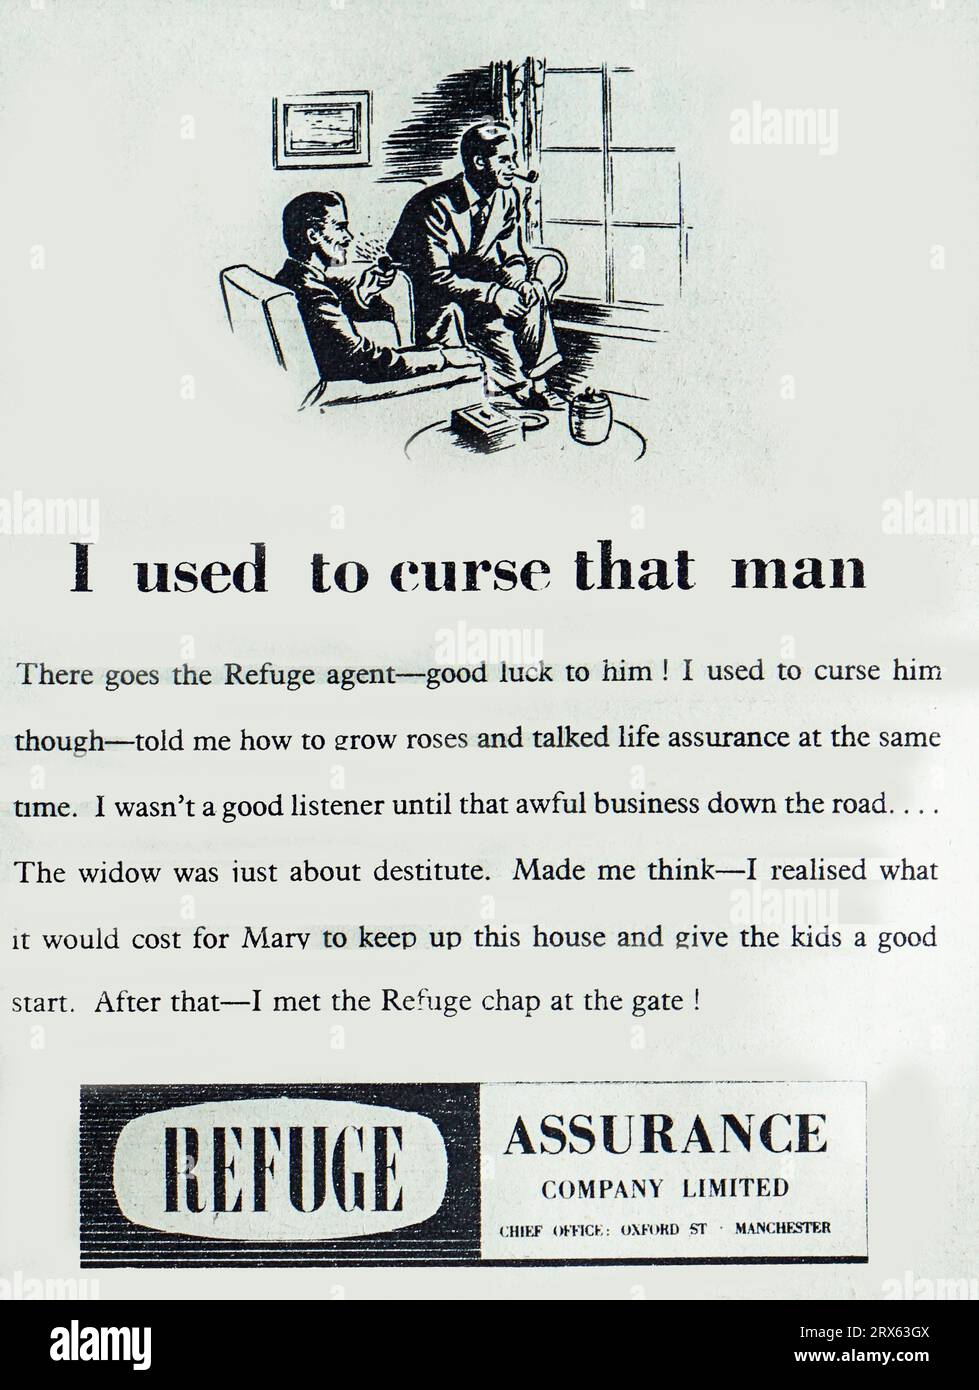 A 1950 advertisement for Refuge Assurance. The advertisement shows two men, both smoking pipes in conversation. The advertisement is headed “ I used to hate that man’ and refers to one of the men who dreaded meeting the other, an agent for Refuge Assurance, It was only until ‘that awful business’ where a widow was left destitute that he realised what it would cost for Mary to keep up the house and give the kids a good start that he realised the importance of the Refuge chap. Founded in 1858 Refuge Assurance was still trading in 1996. It became part of the Royal London Group. Stock Photo